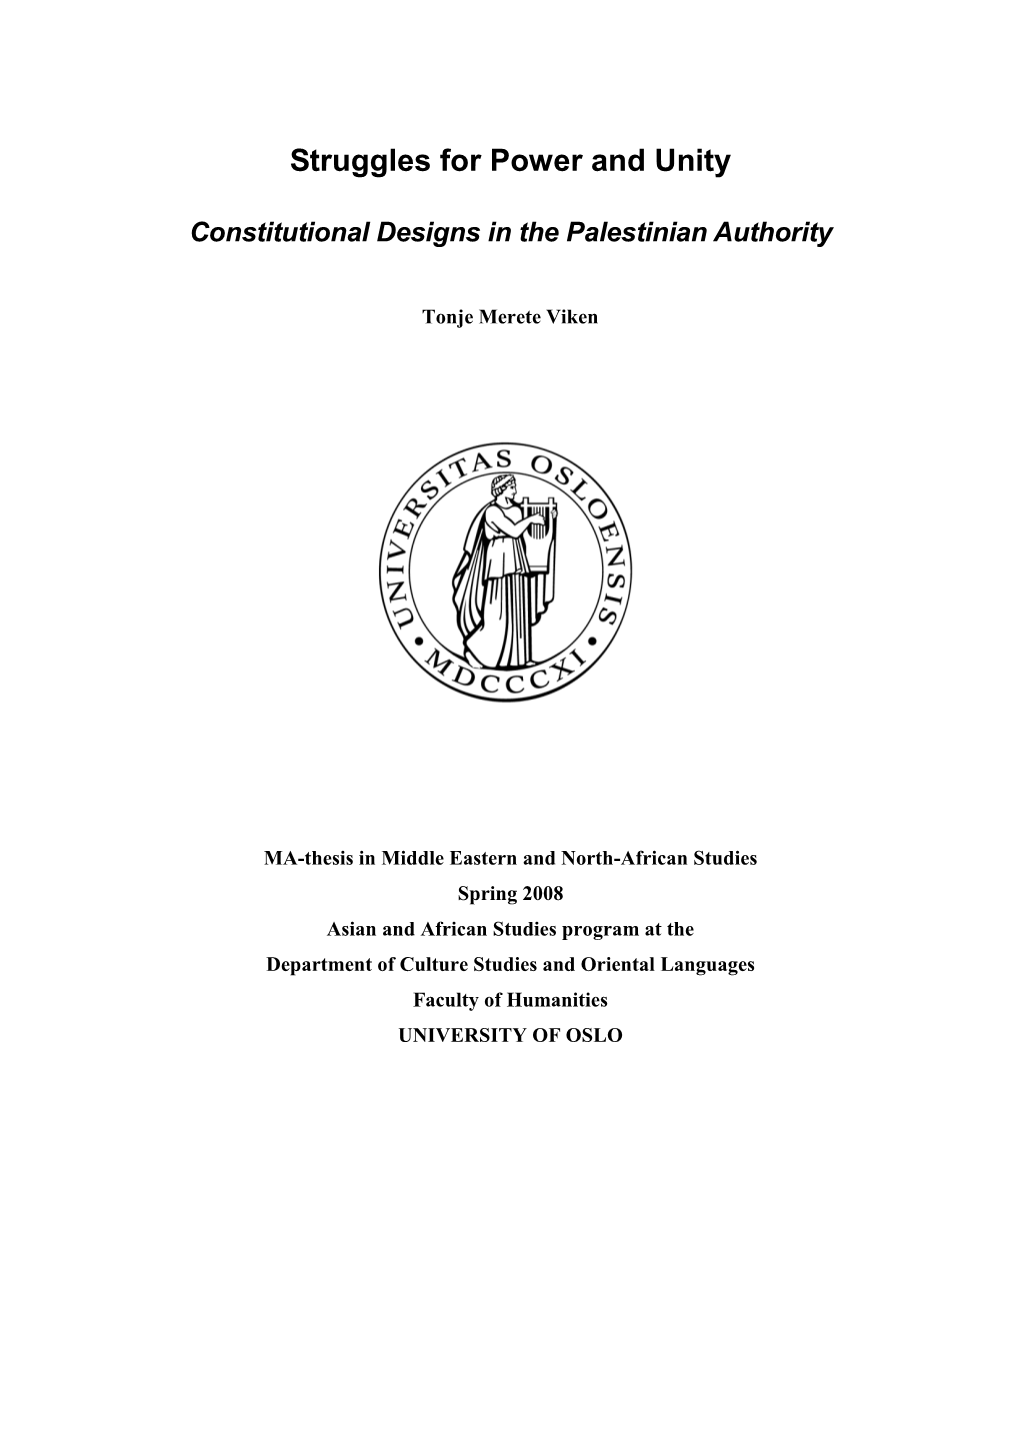 Struggles for Power and Unity: Constitutional Designs in the Palestinian Authority